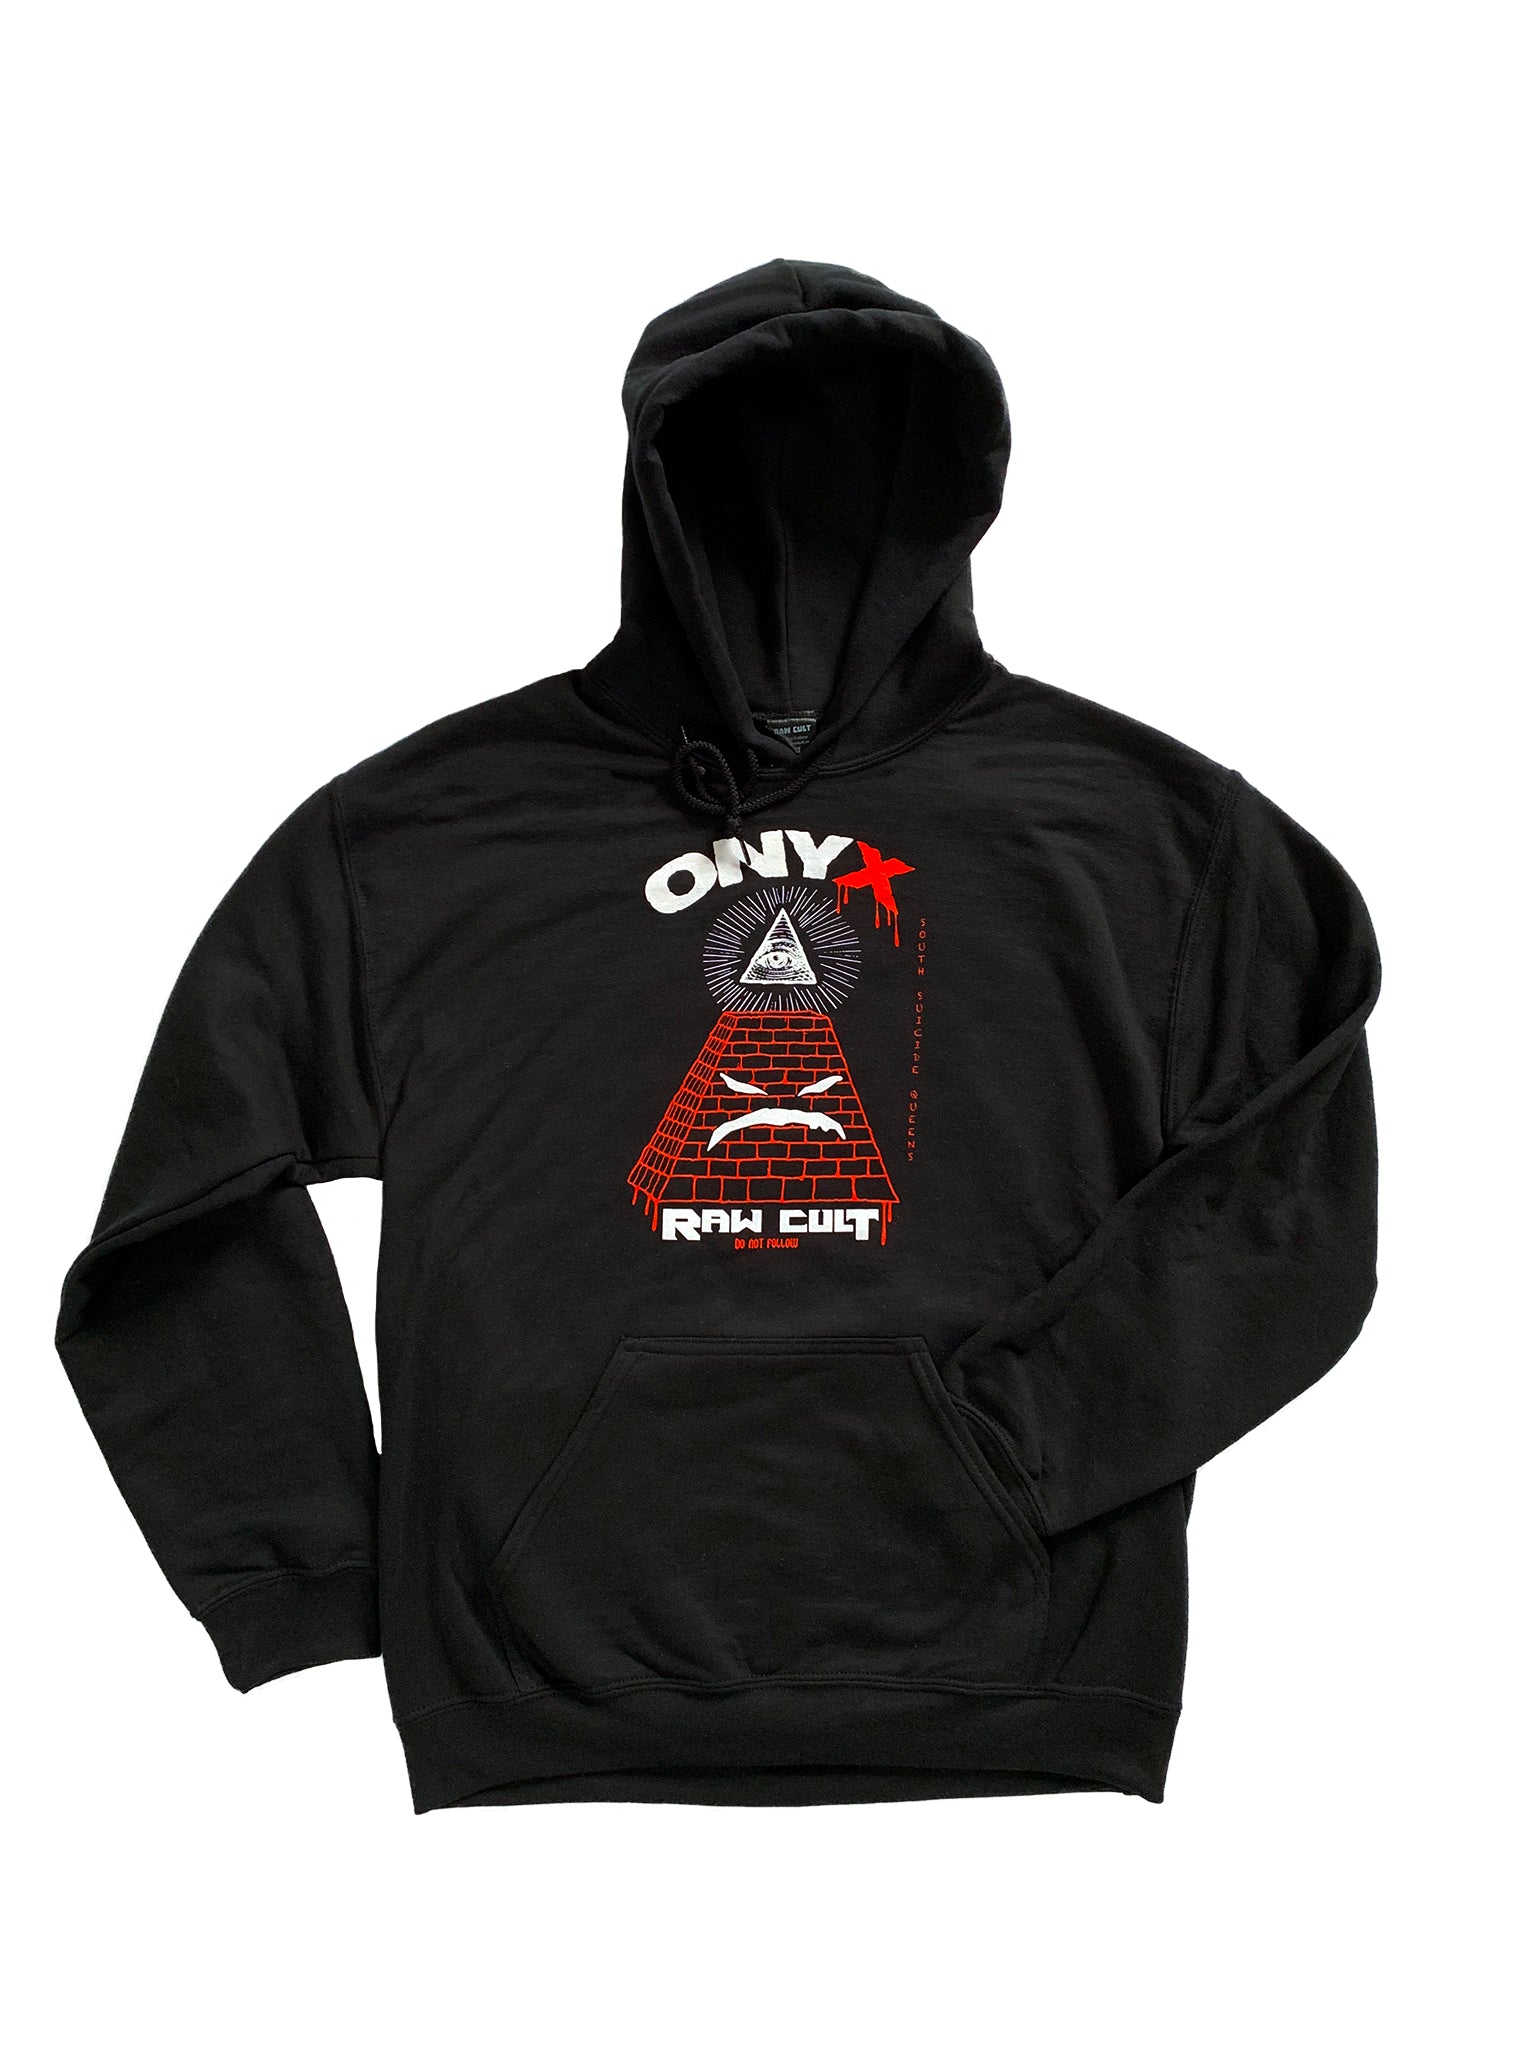 ONYX - Onyx - MadFace Hoodies now available in Europe at